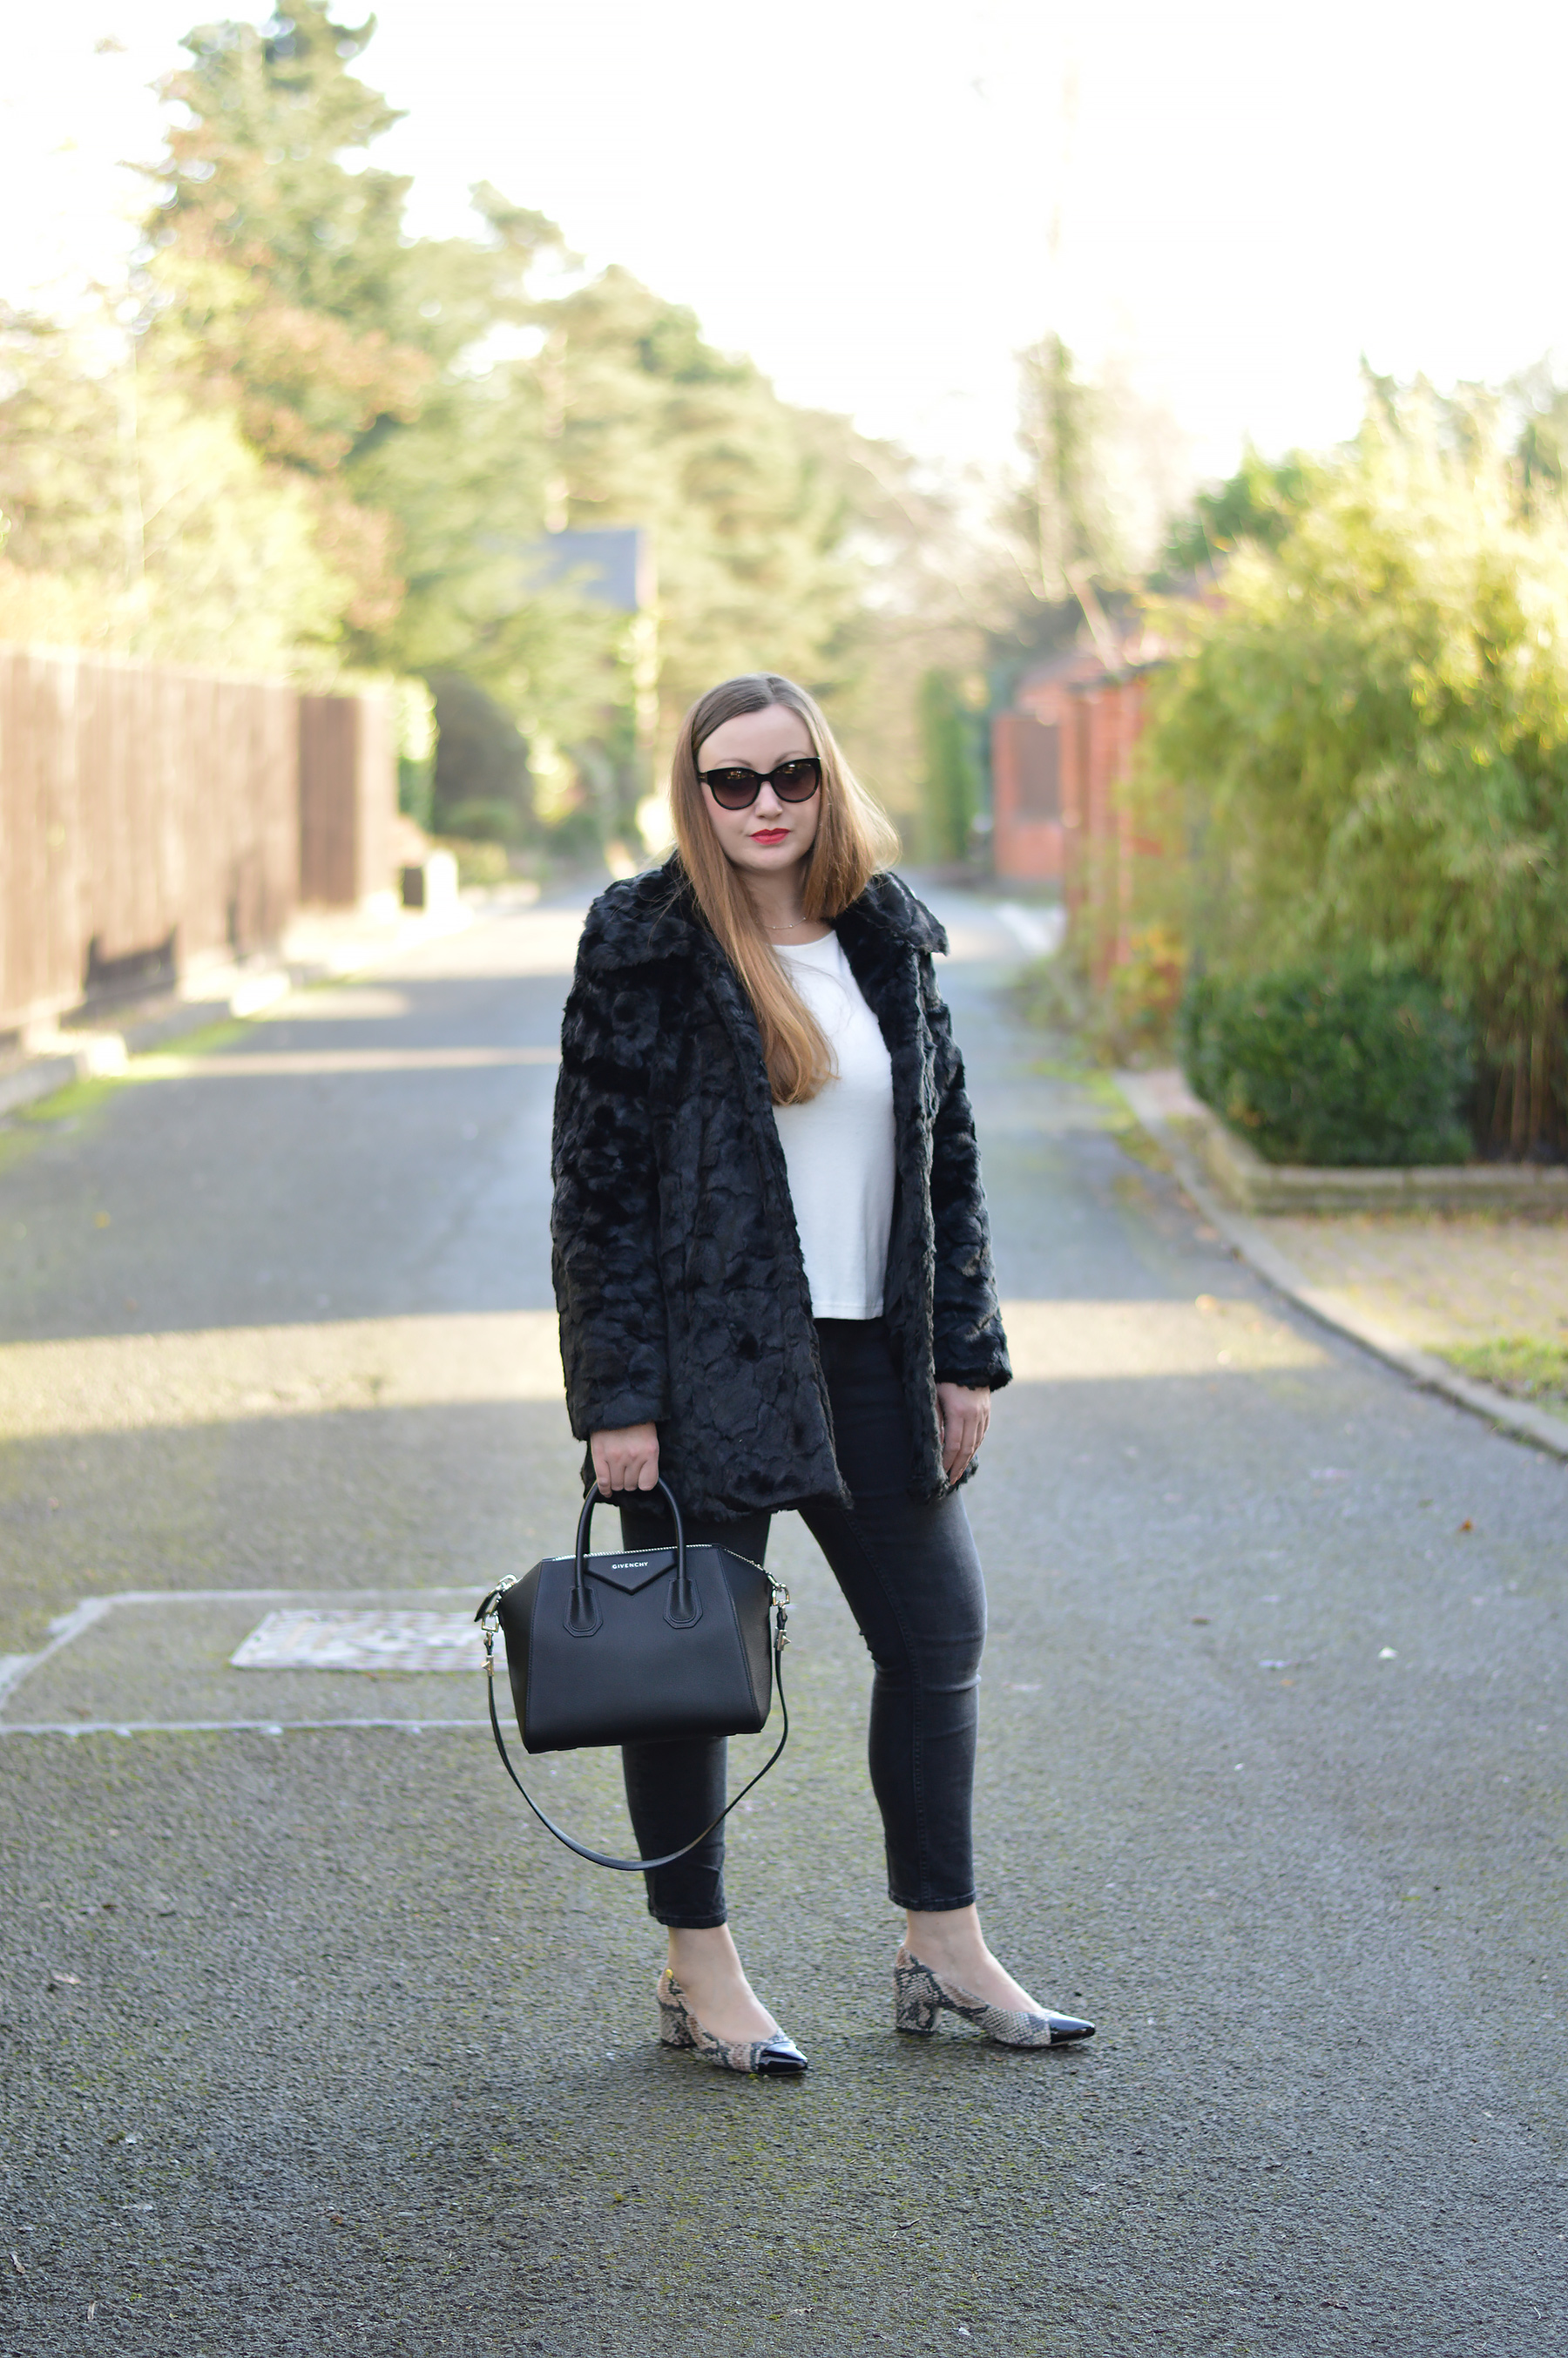 Black Fur coat with white top and black jeans